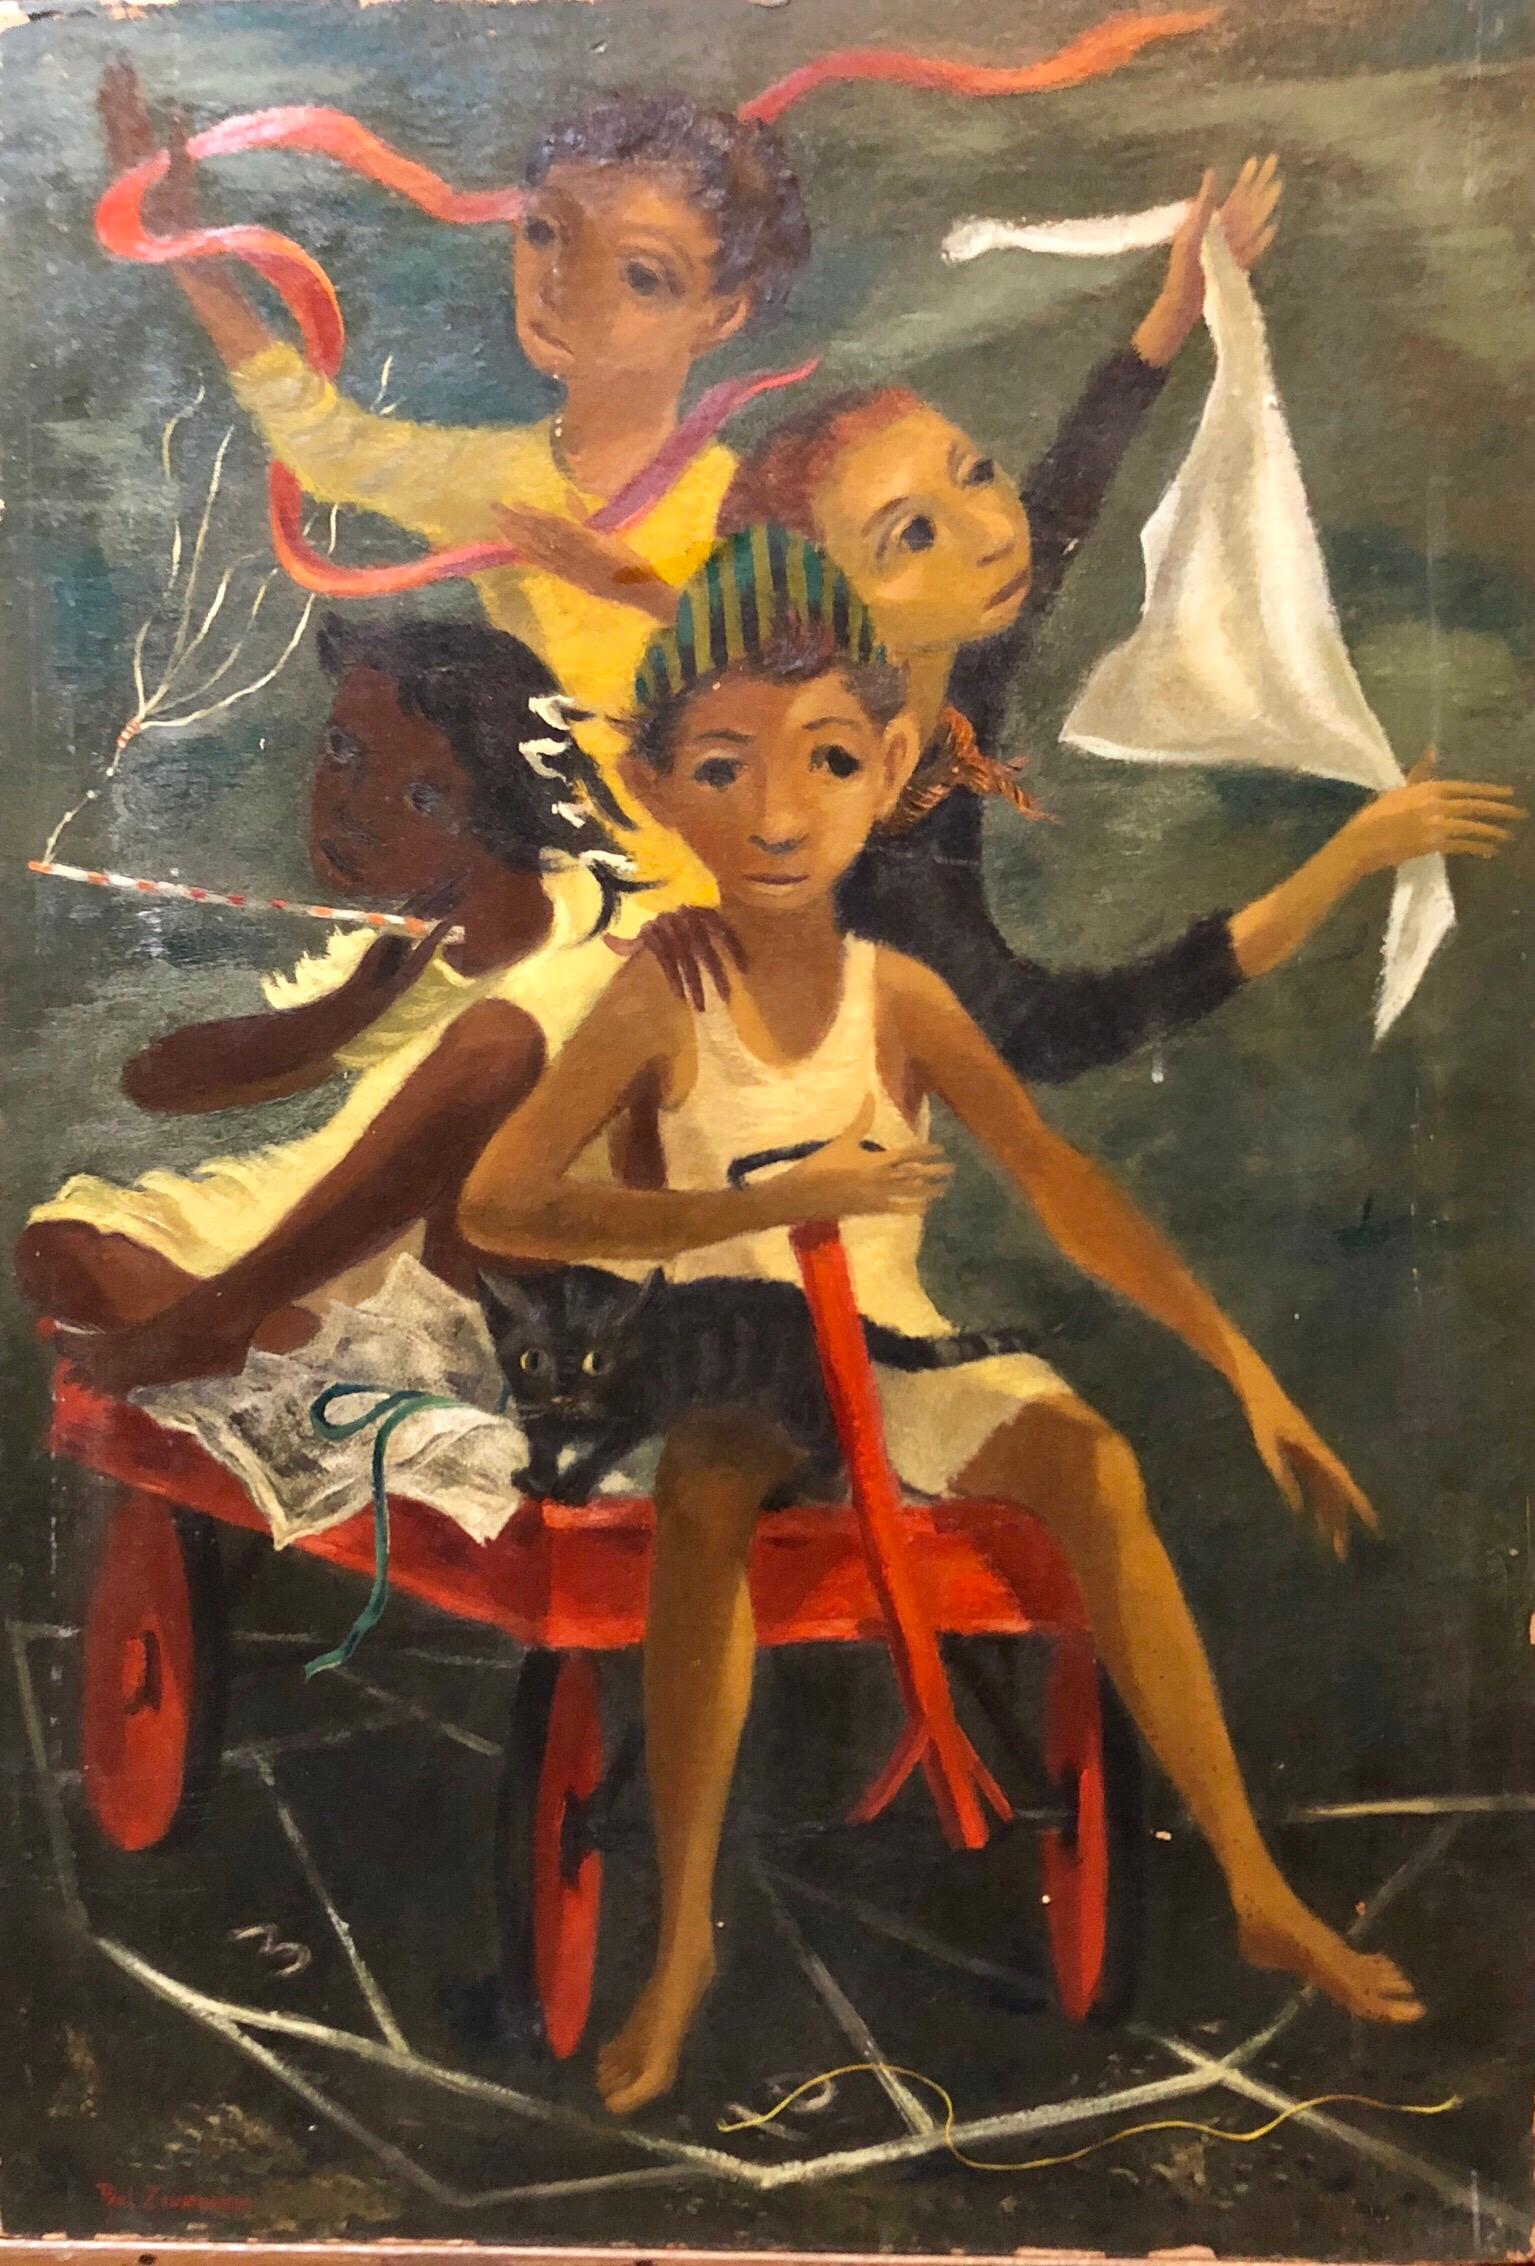 Oil on artist's board, 20th century, signed Paul Zimmerman Reminiscent of the Mid Century Social Realist and WPA works of Ben Shahn this captures a group of tenement children of mixed races, African American, etc. all playing together in a wagon